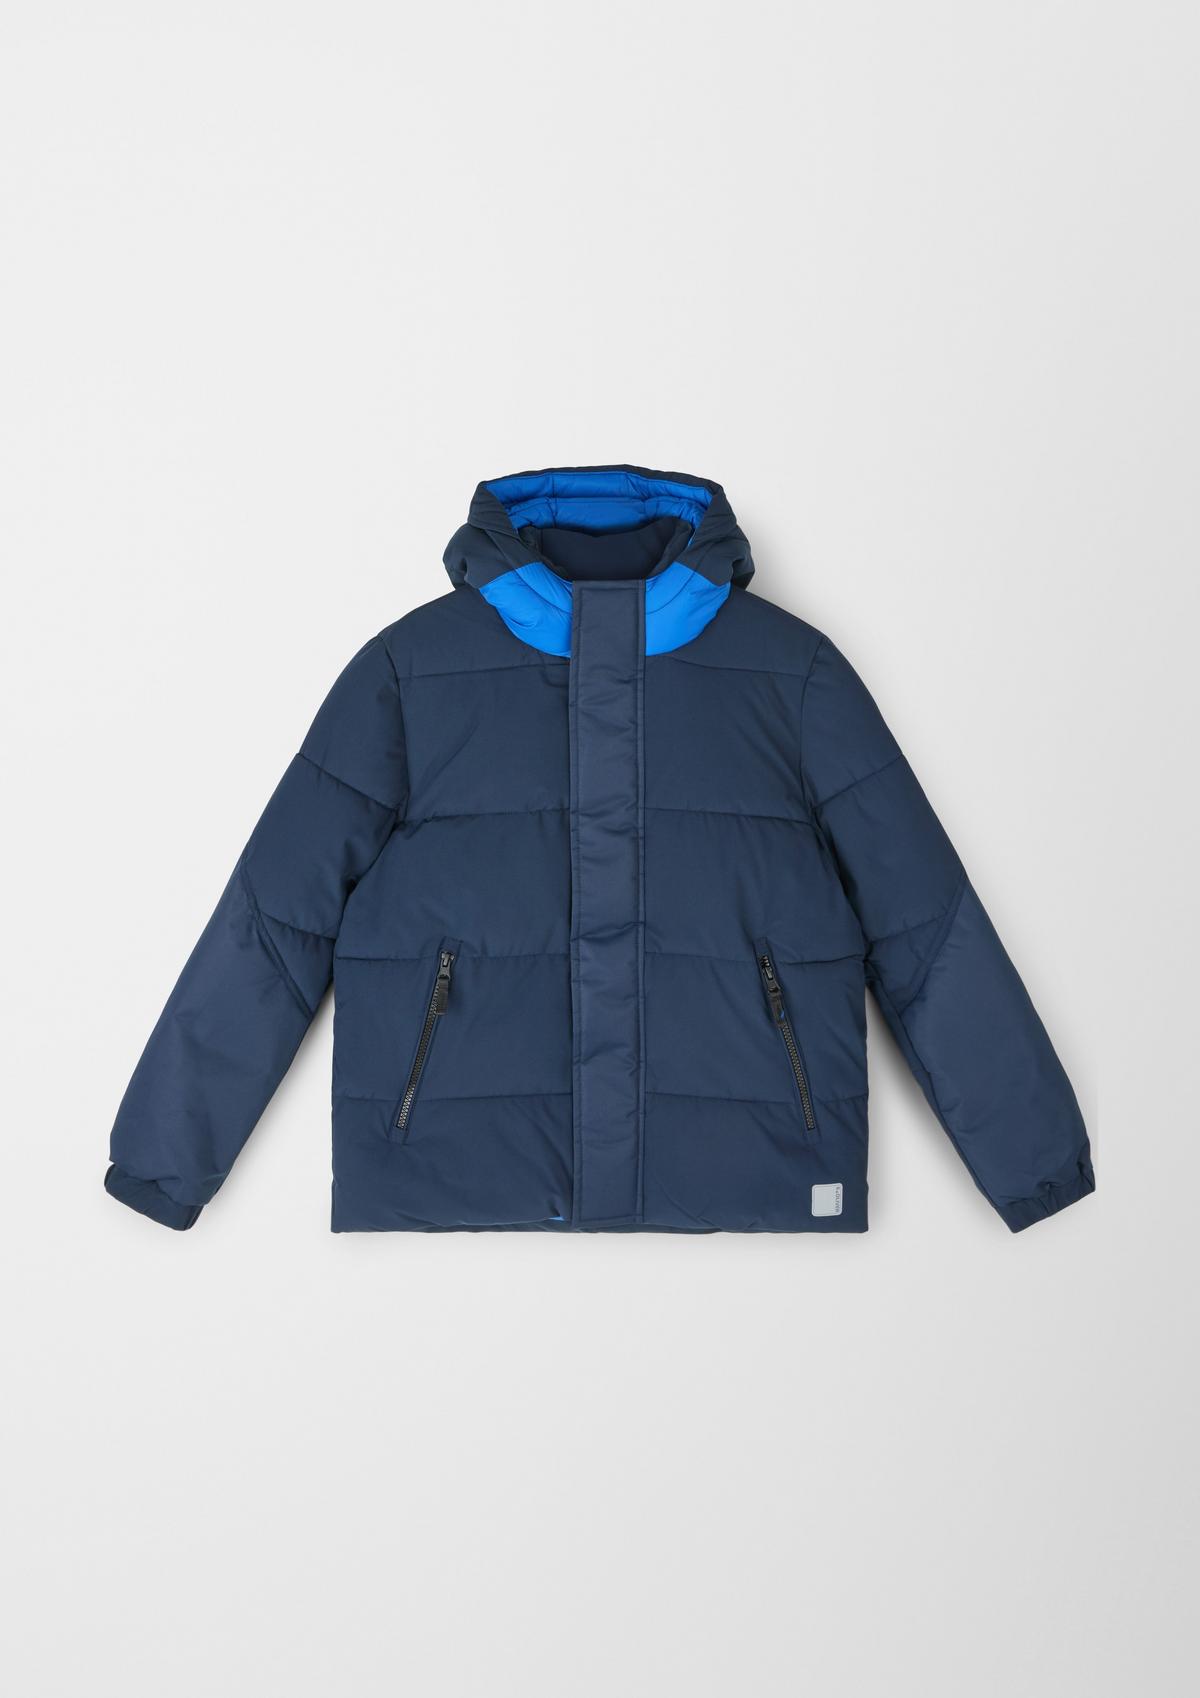 Windbreaker with contrasting details - navy